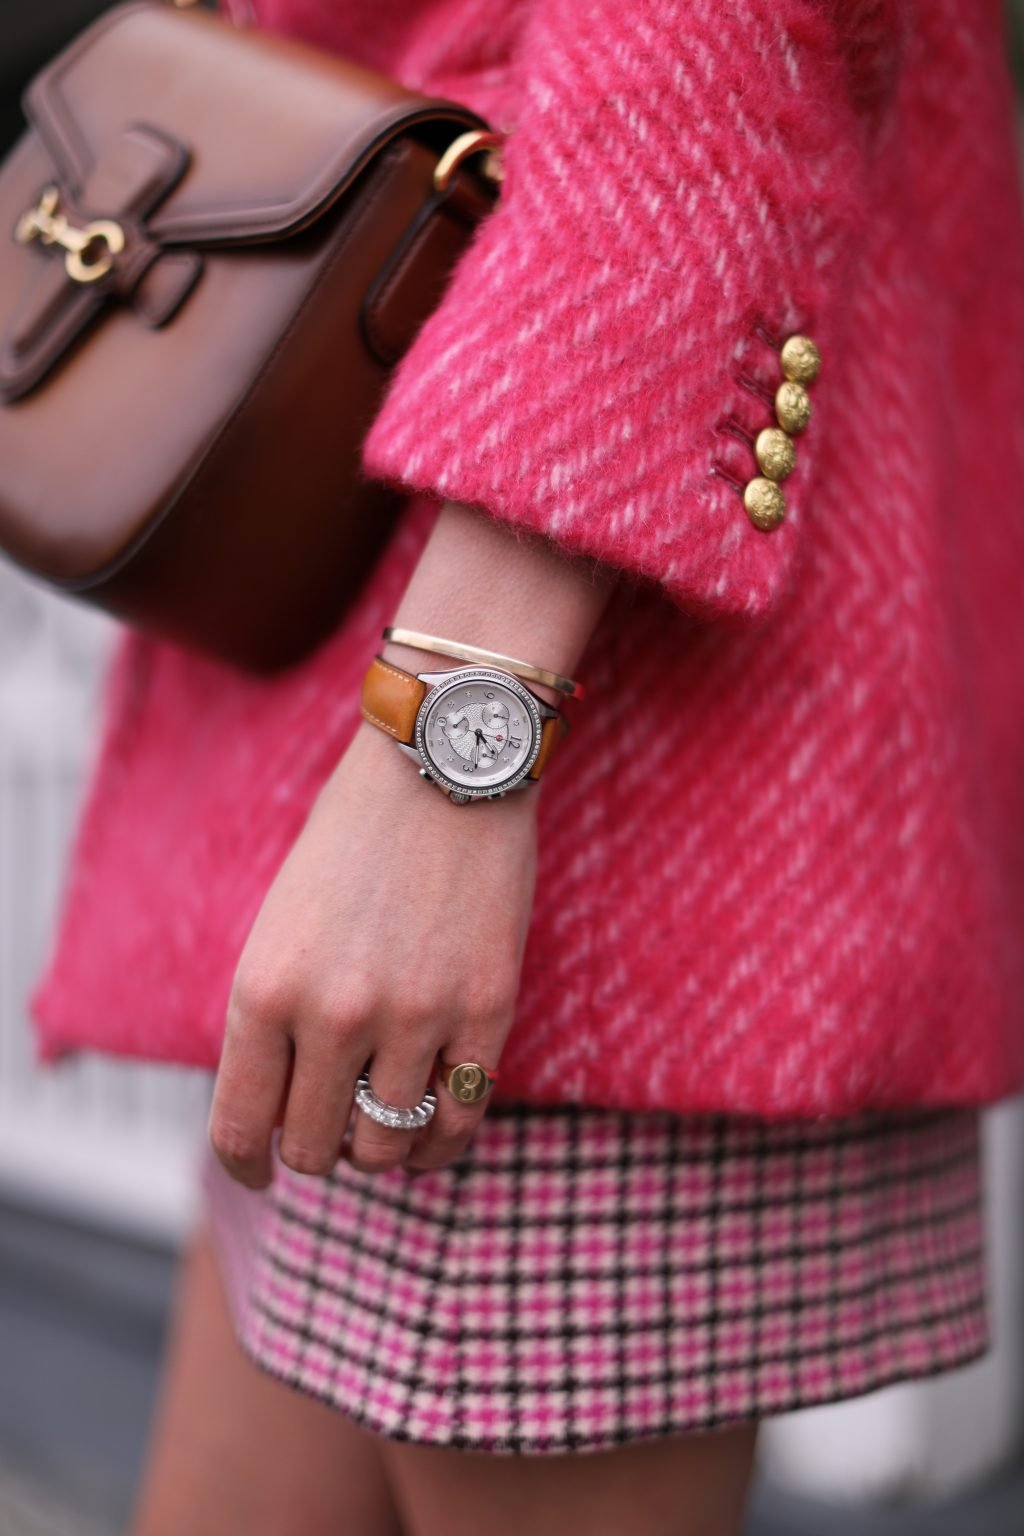 atlantic-pacific-jewelry-watches-michele-gucci-jcrew-pink-peacoat